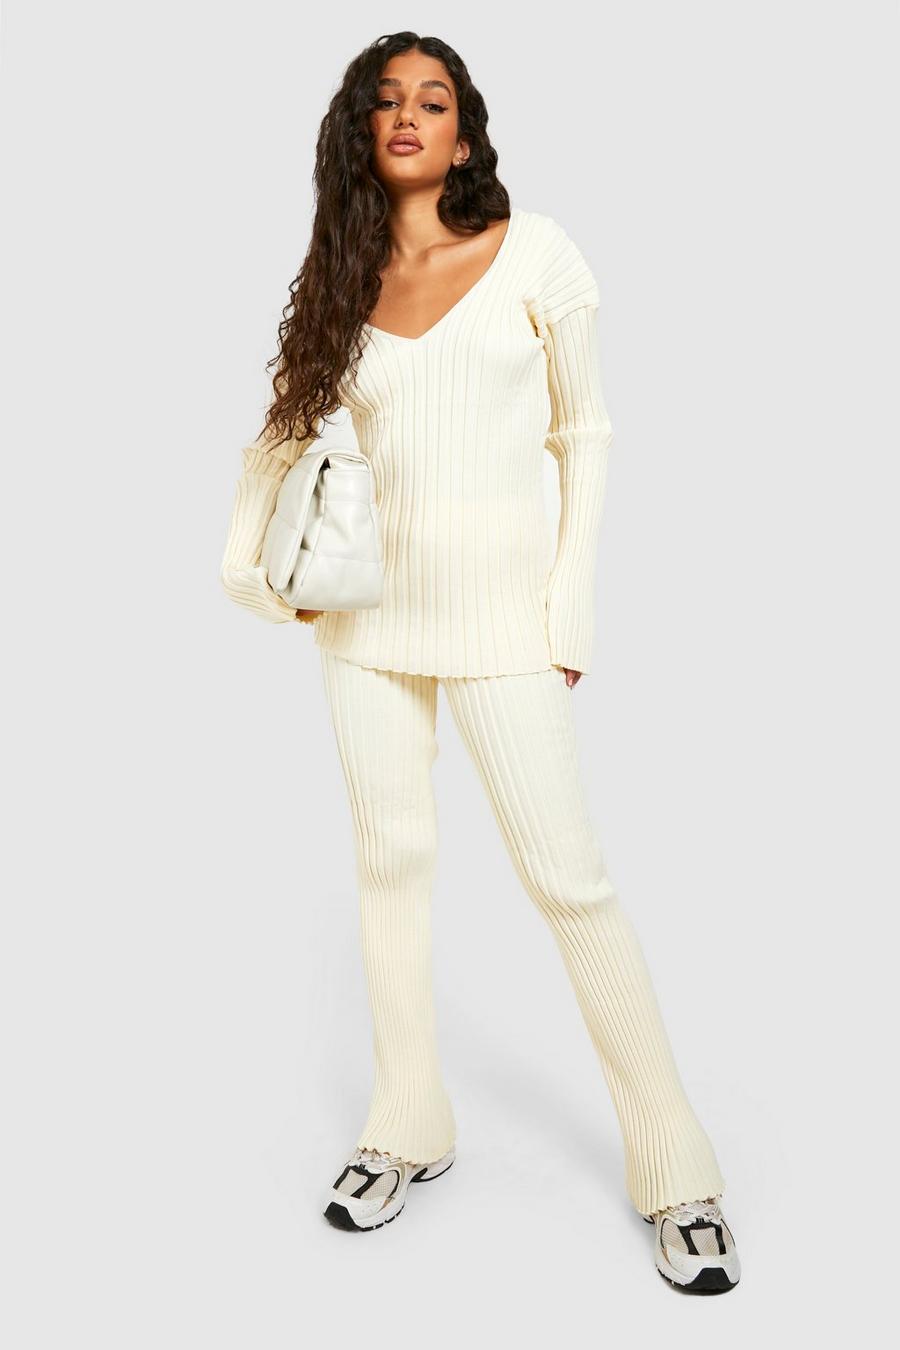 Cream white Two Tone Plunge Jumper Knitted Set